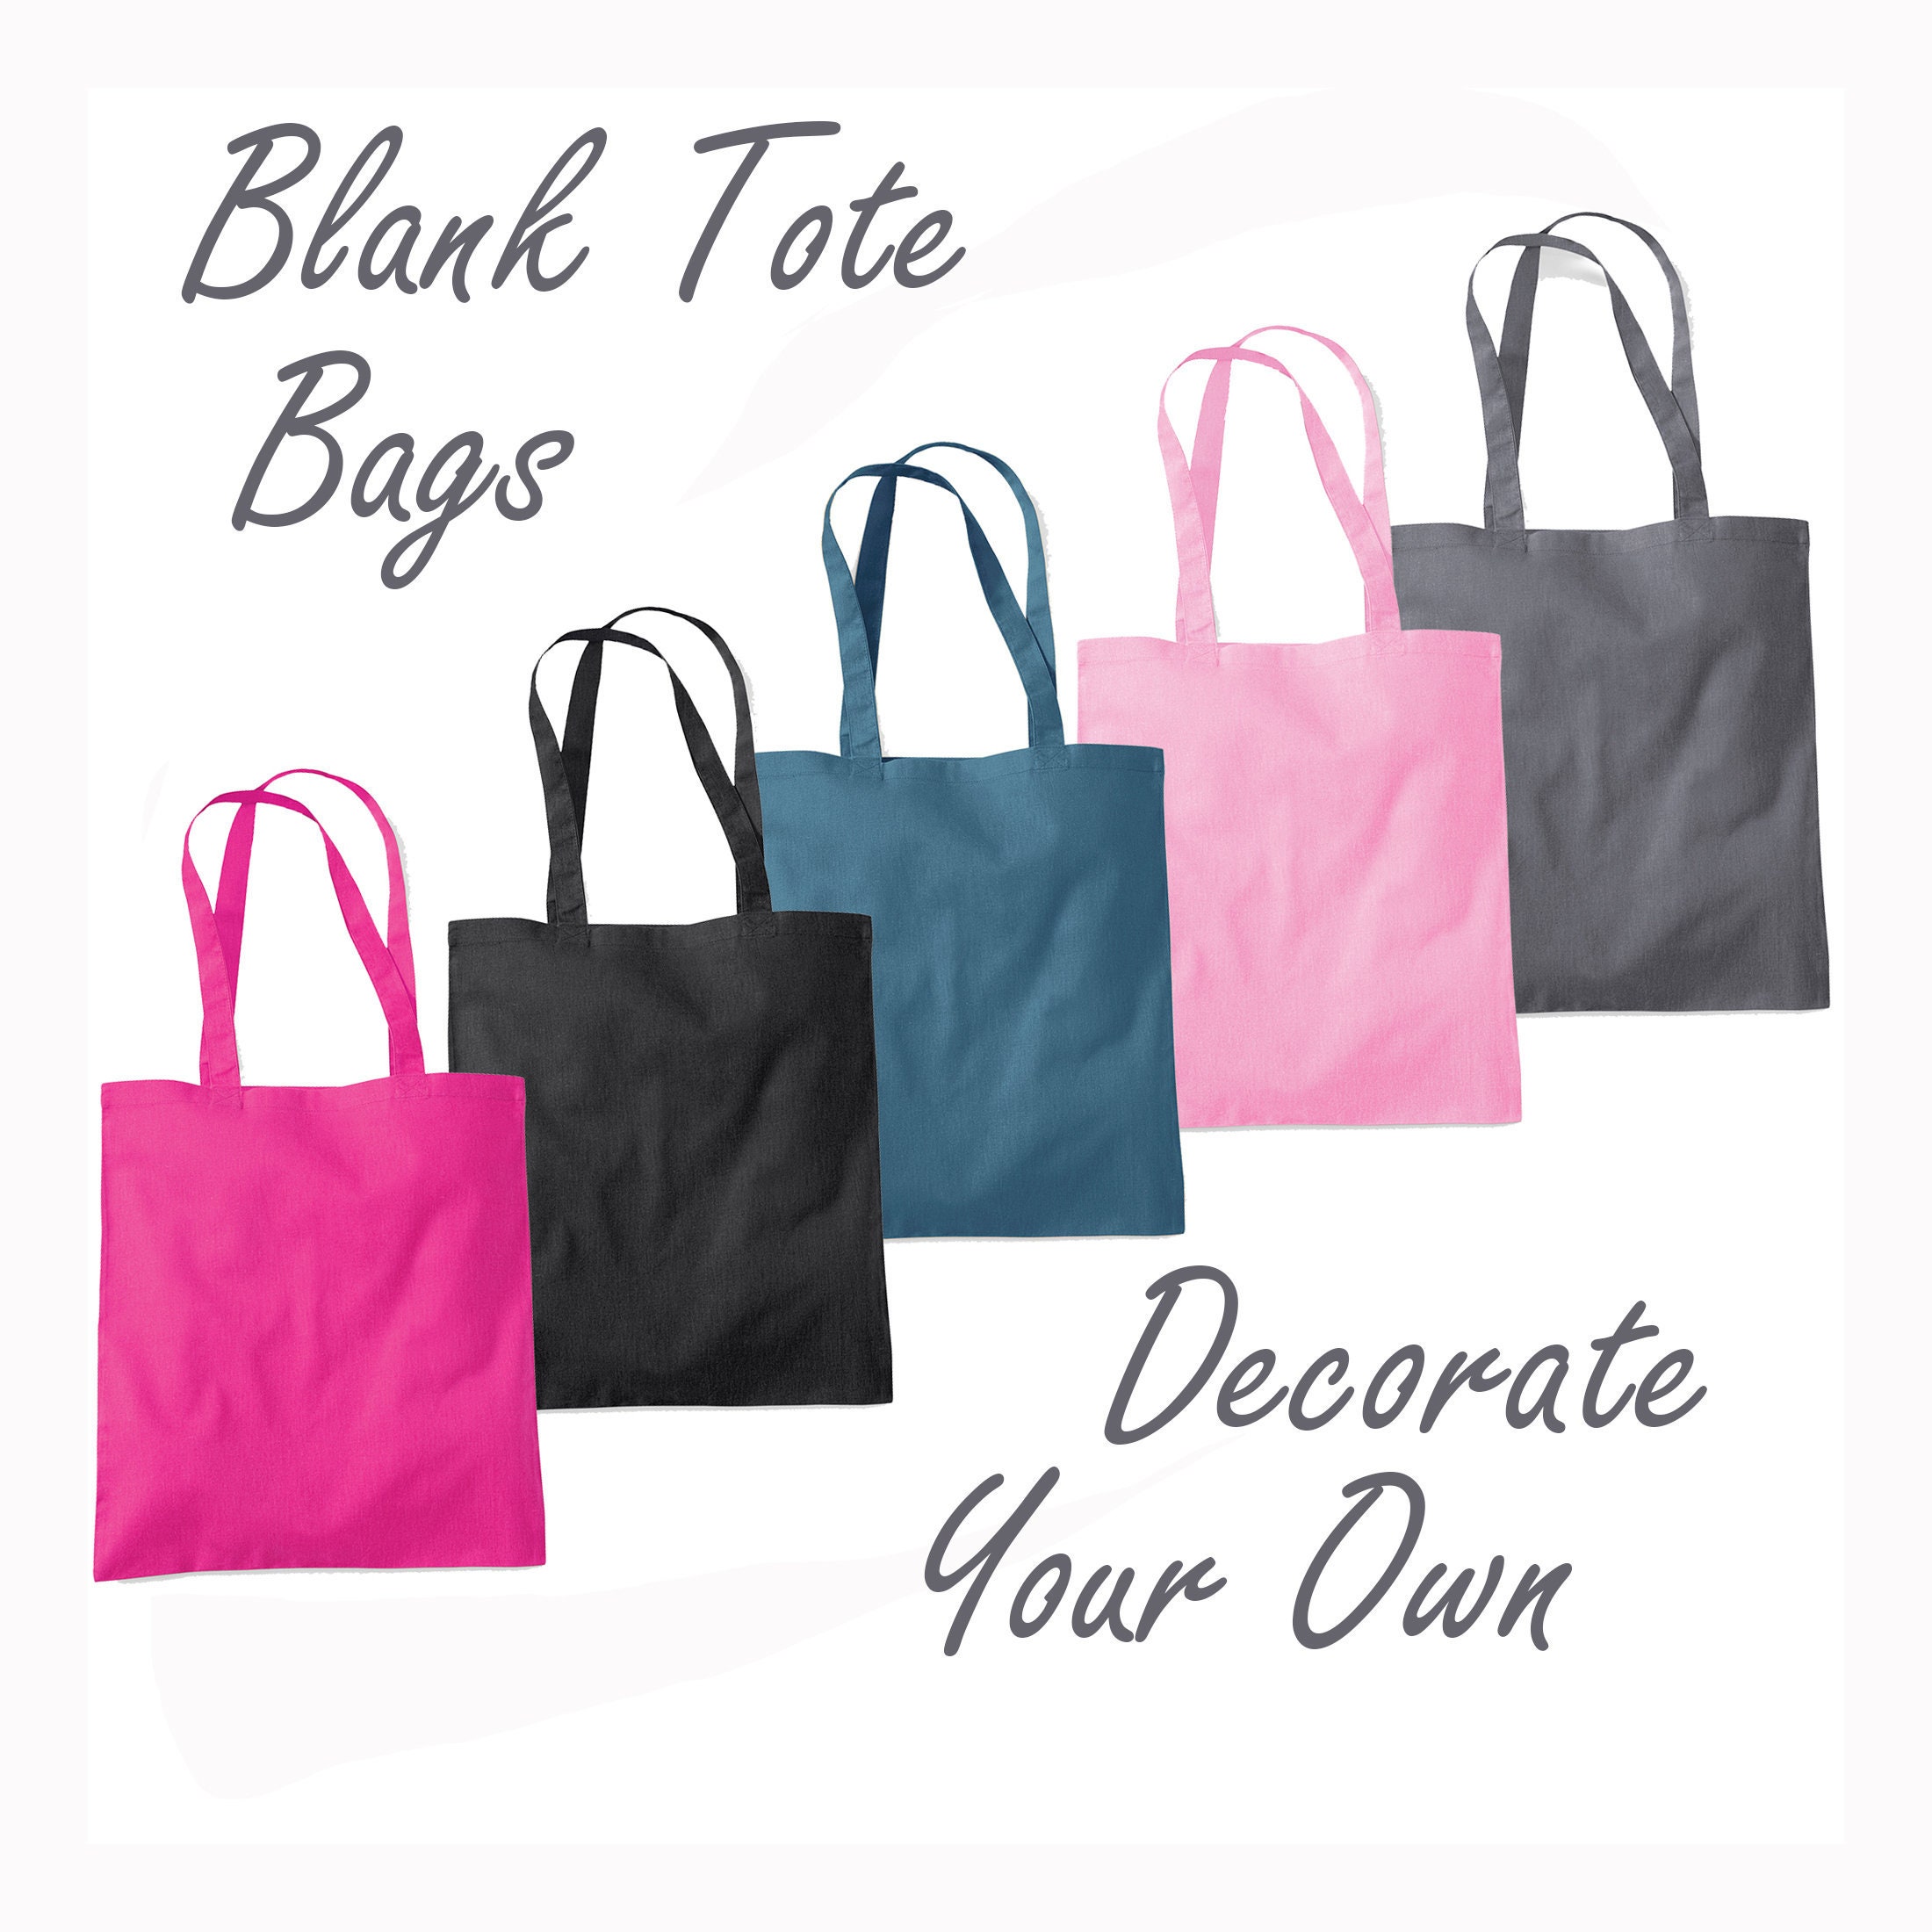 Plain Coloured Cotton Shopping Tote Shoulder Bags Available in 14